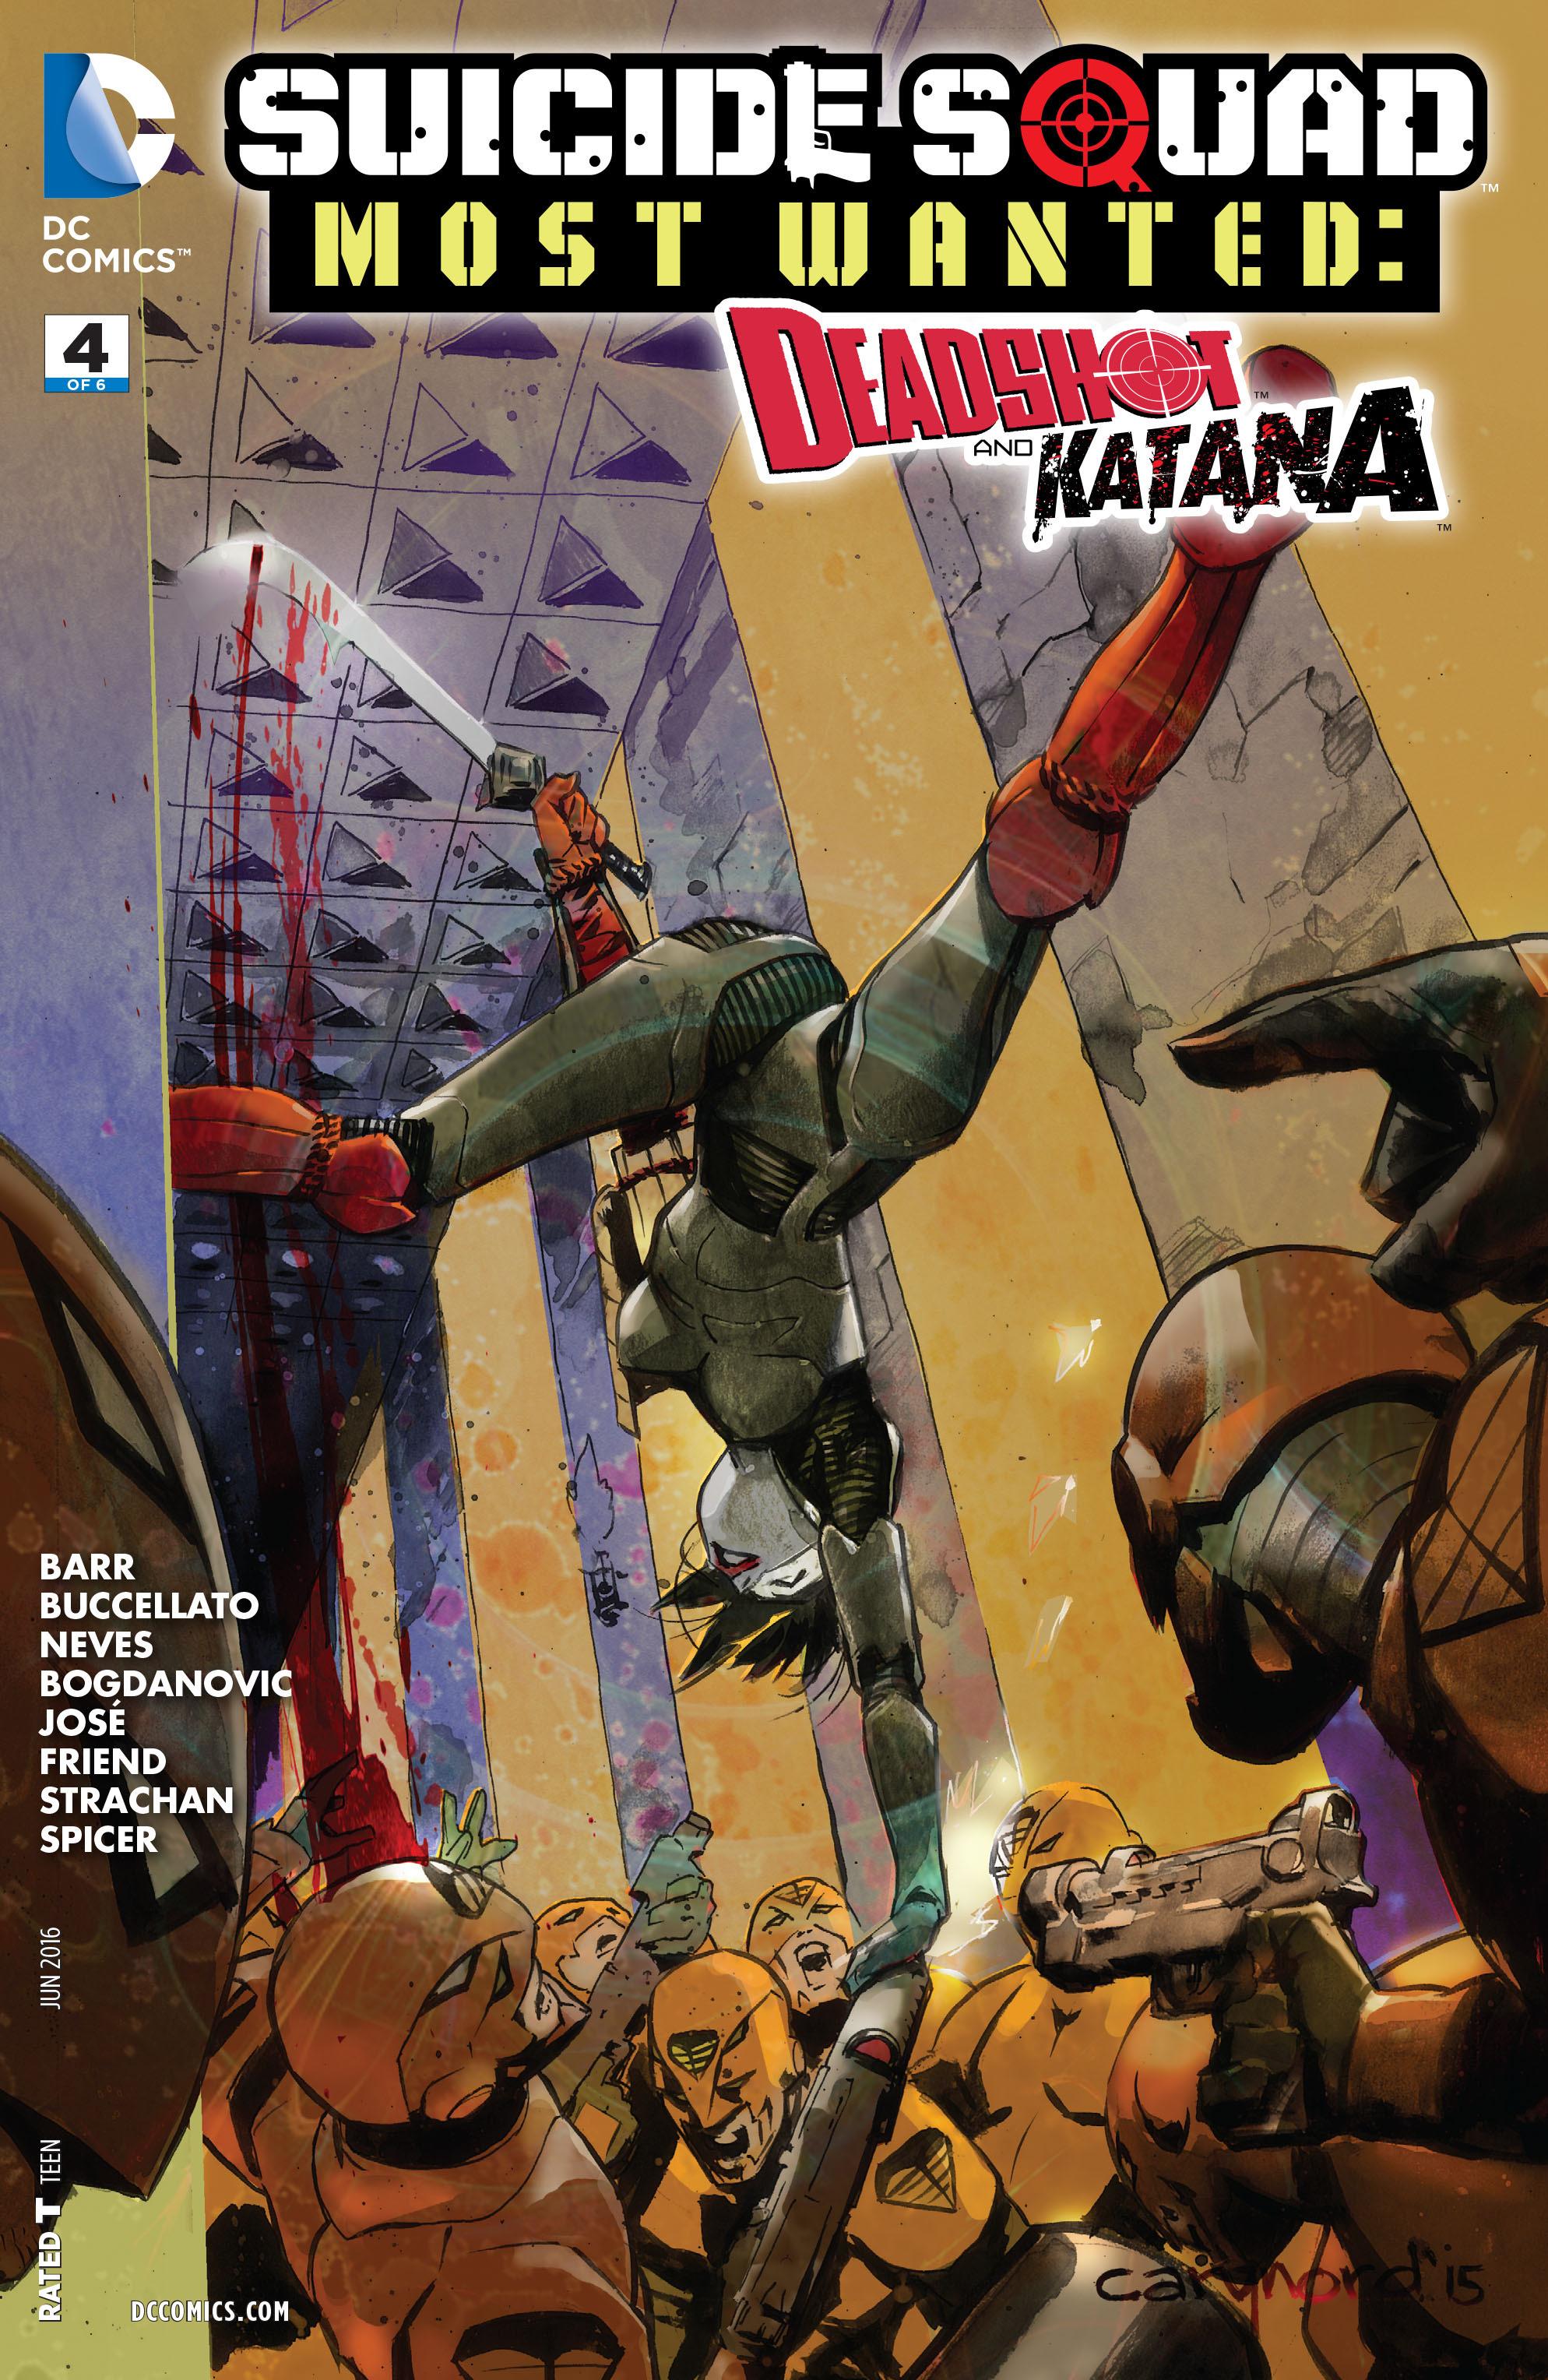 Suicide Squad Most Wanted: Deadshot and Katana Vol. 1 #4